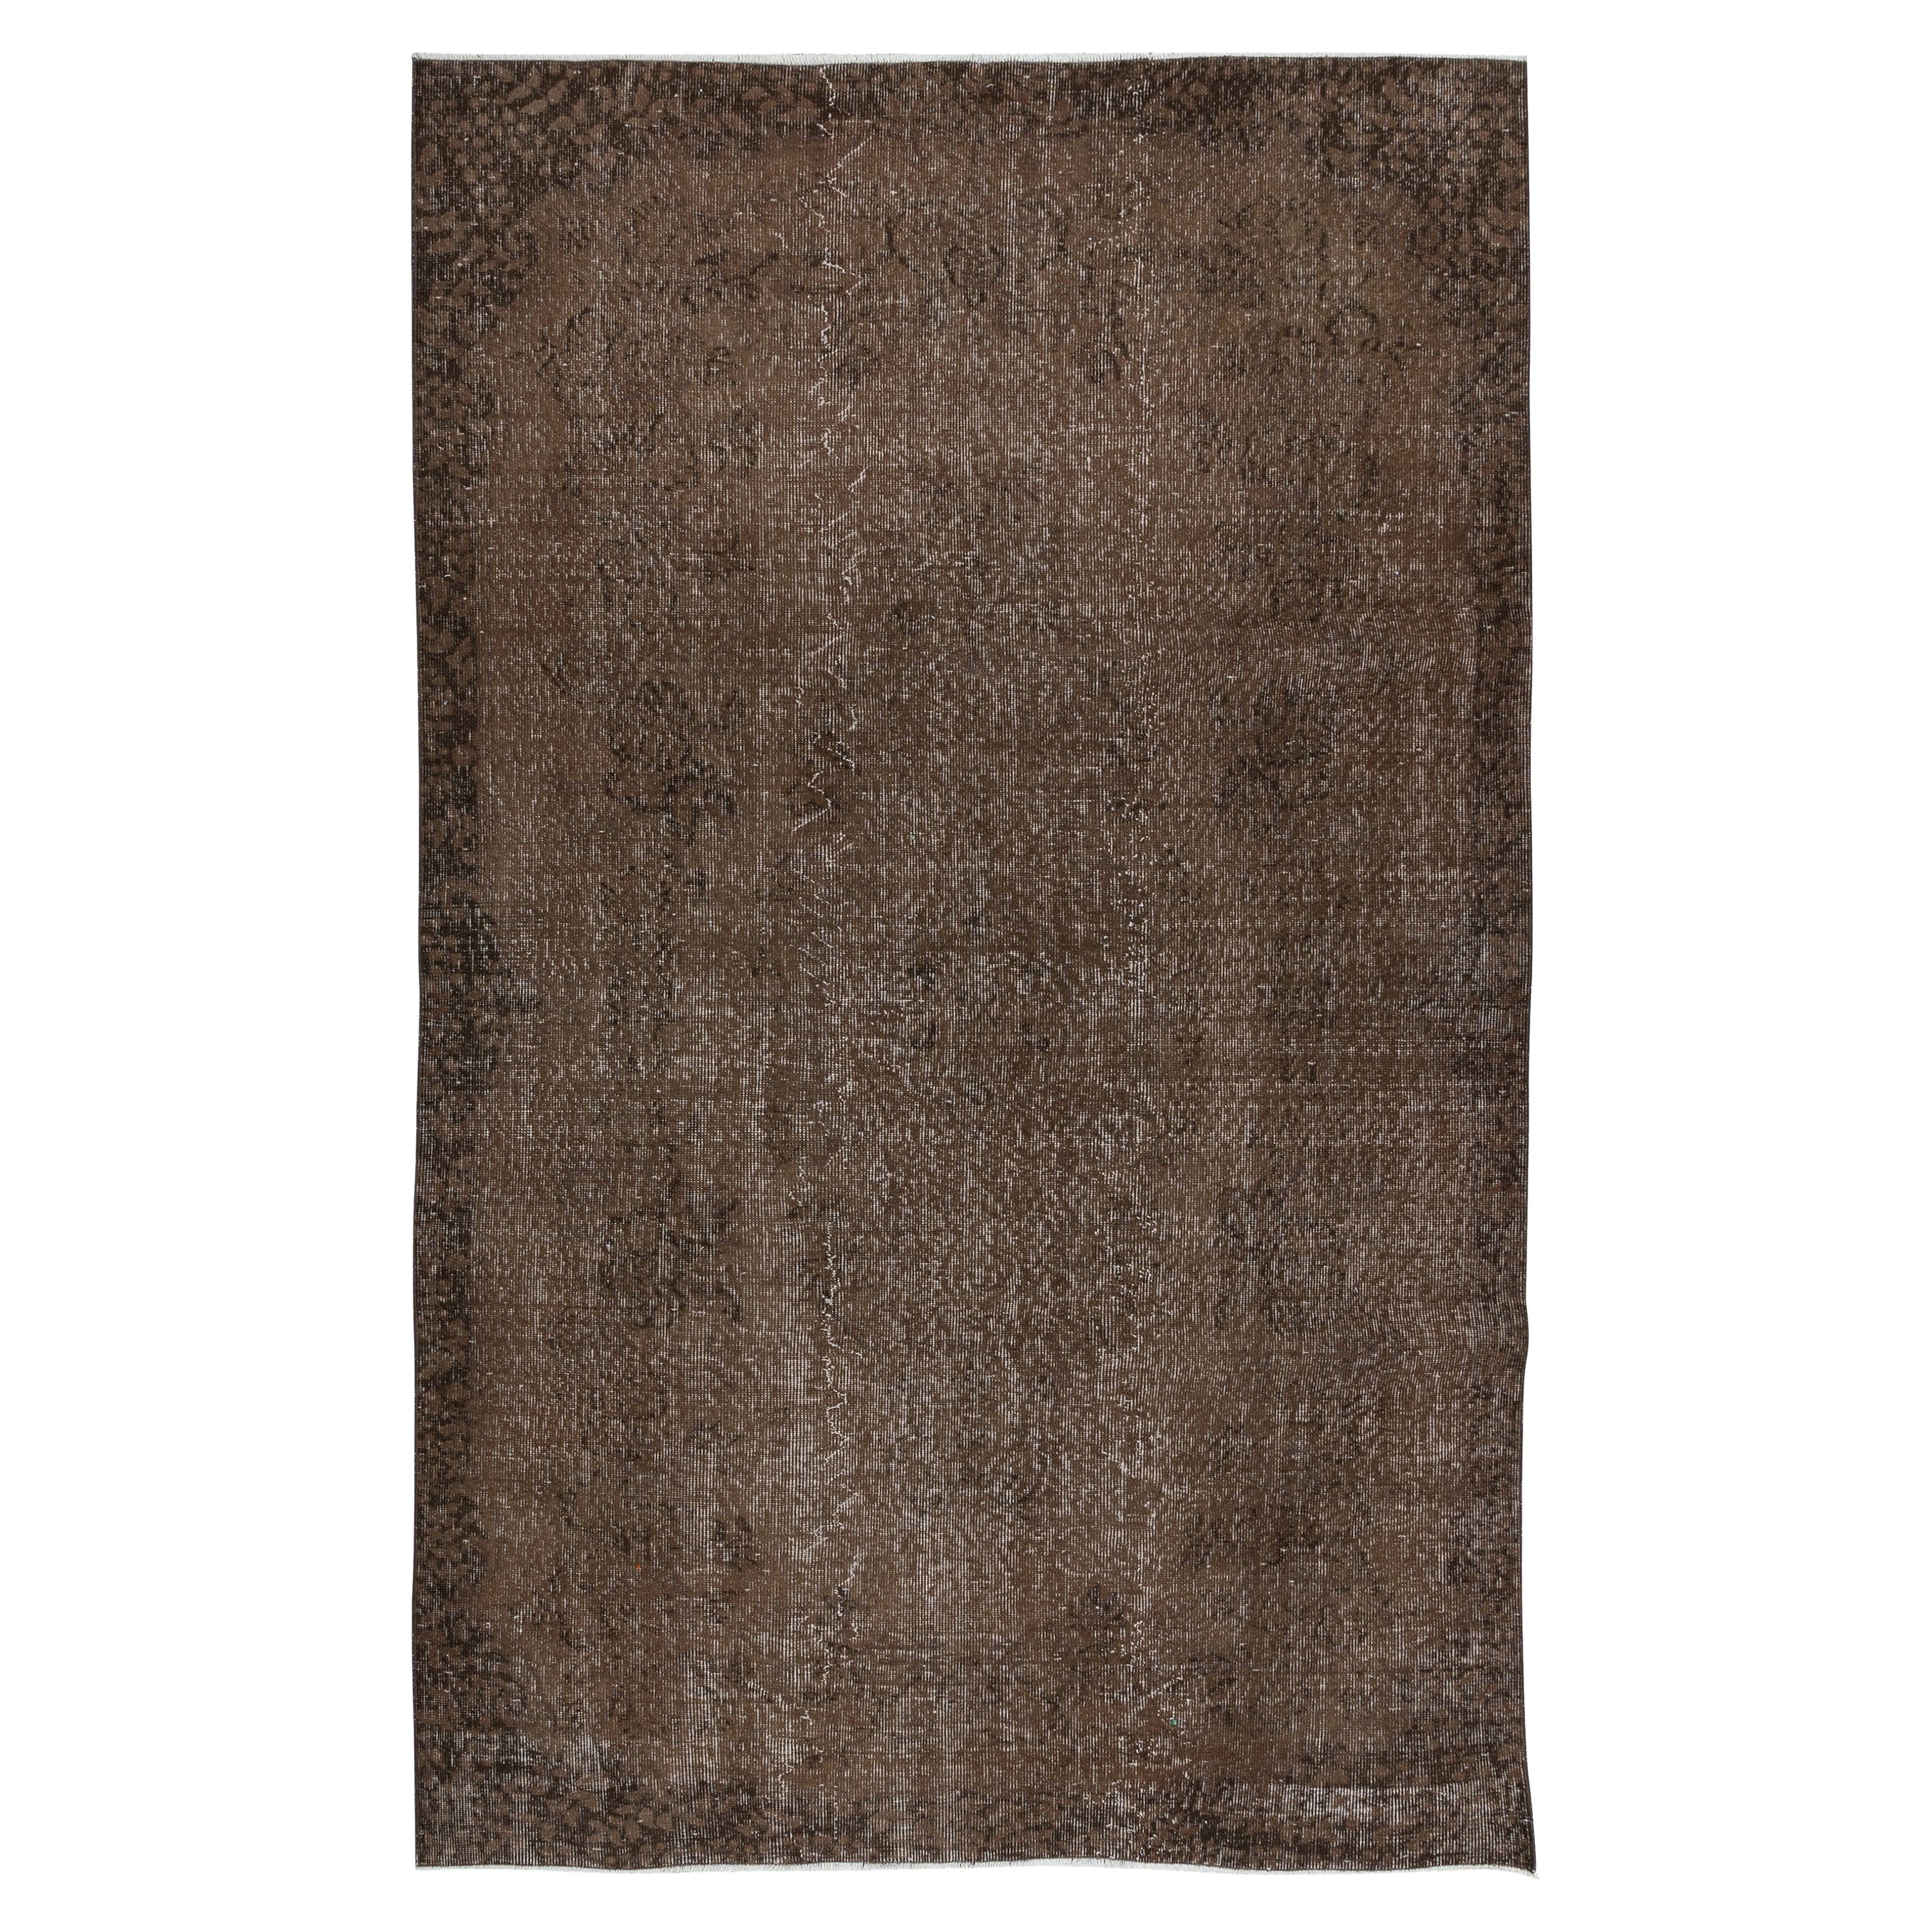 5.6x8.8 Ft Brown Re-Dyed Handmade Turkish Wool Area Rug for Modern Interiors